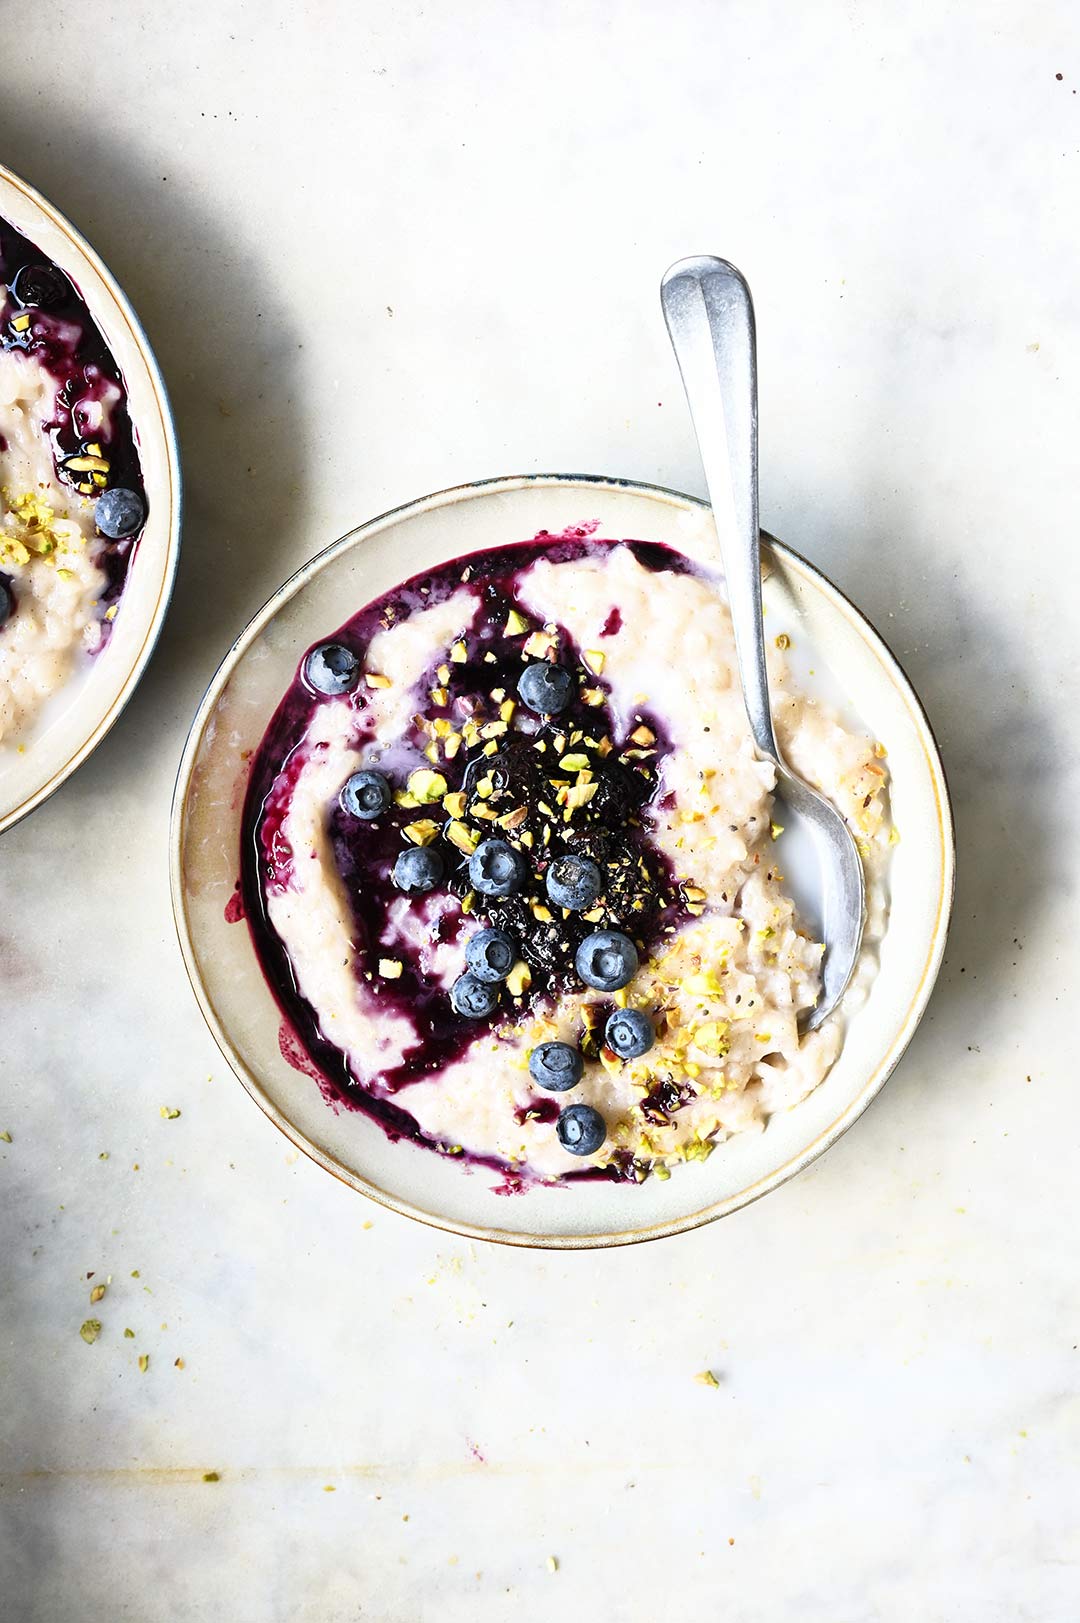 serving dumplings | Spiced coconut rice pudding with ginger blueberries